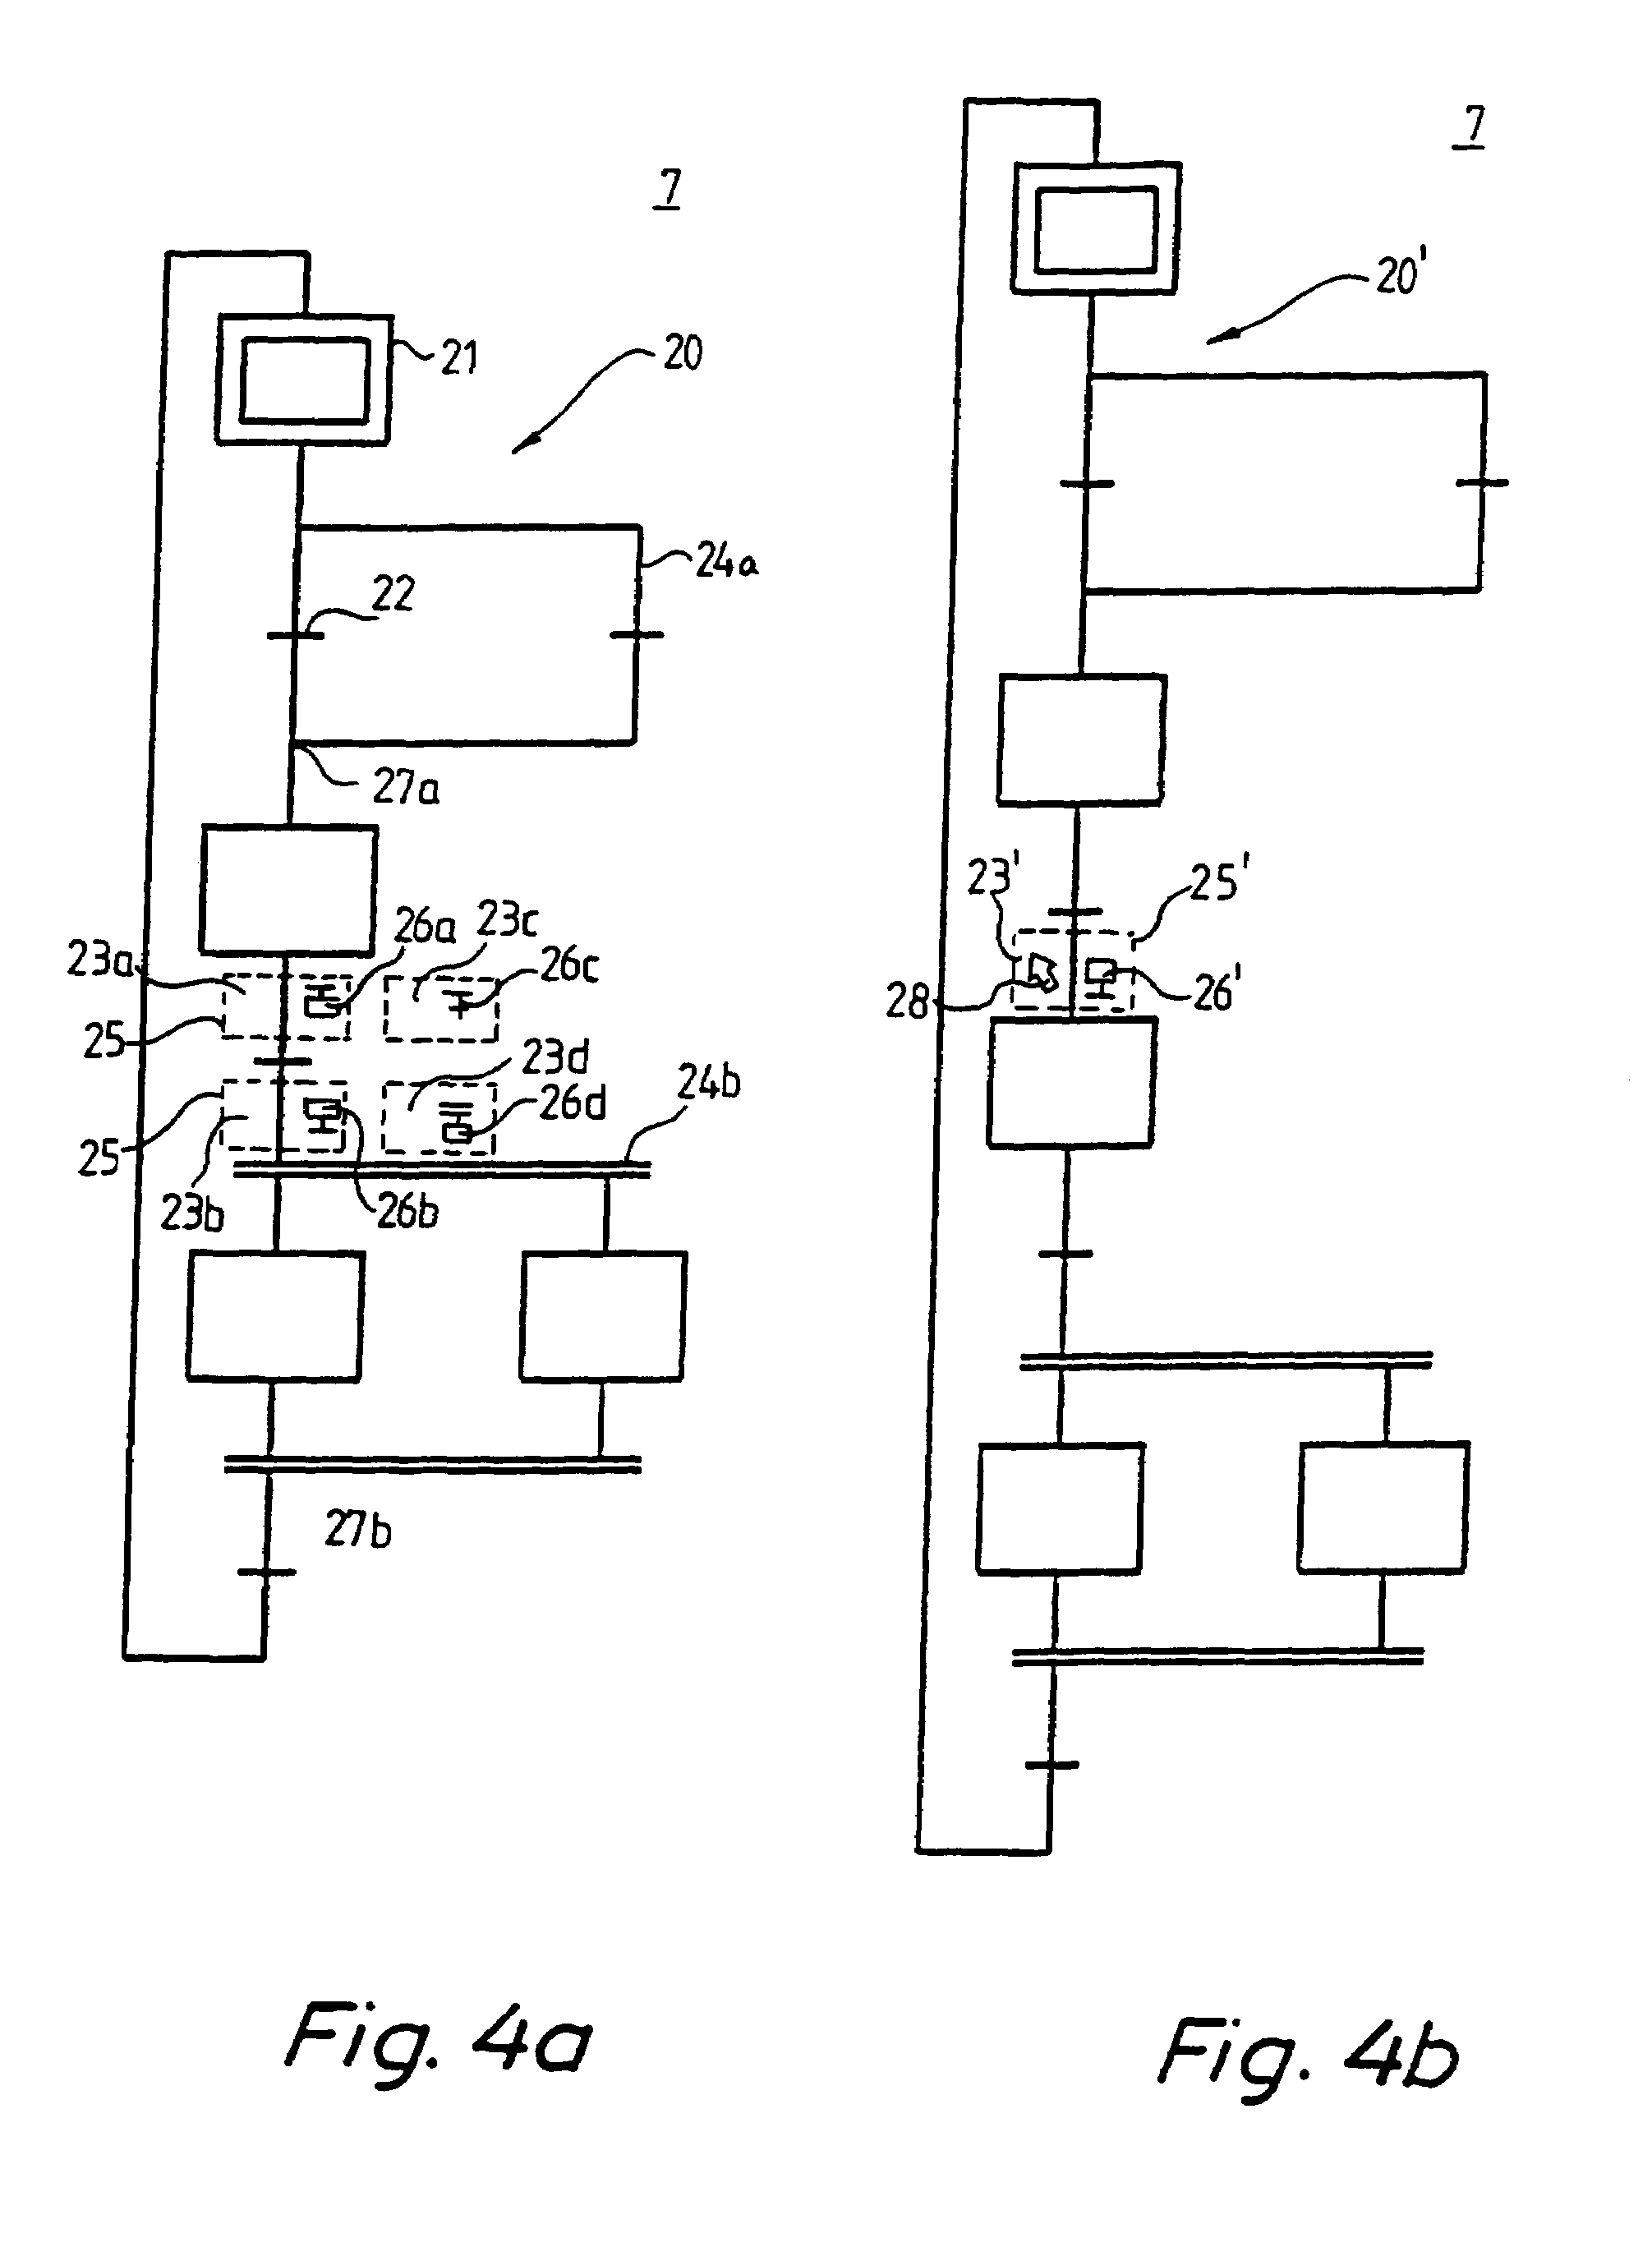 Method for inserting objects into a working area in a computer application